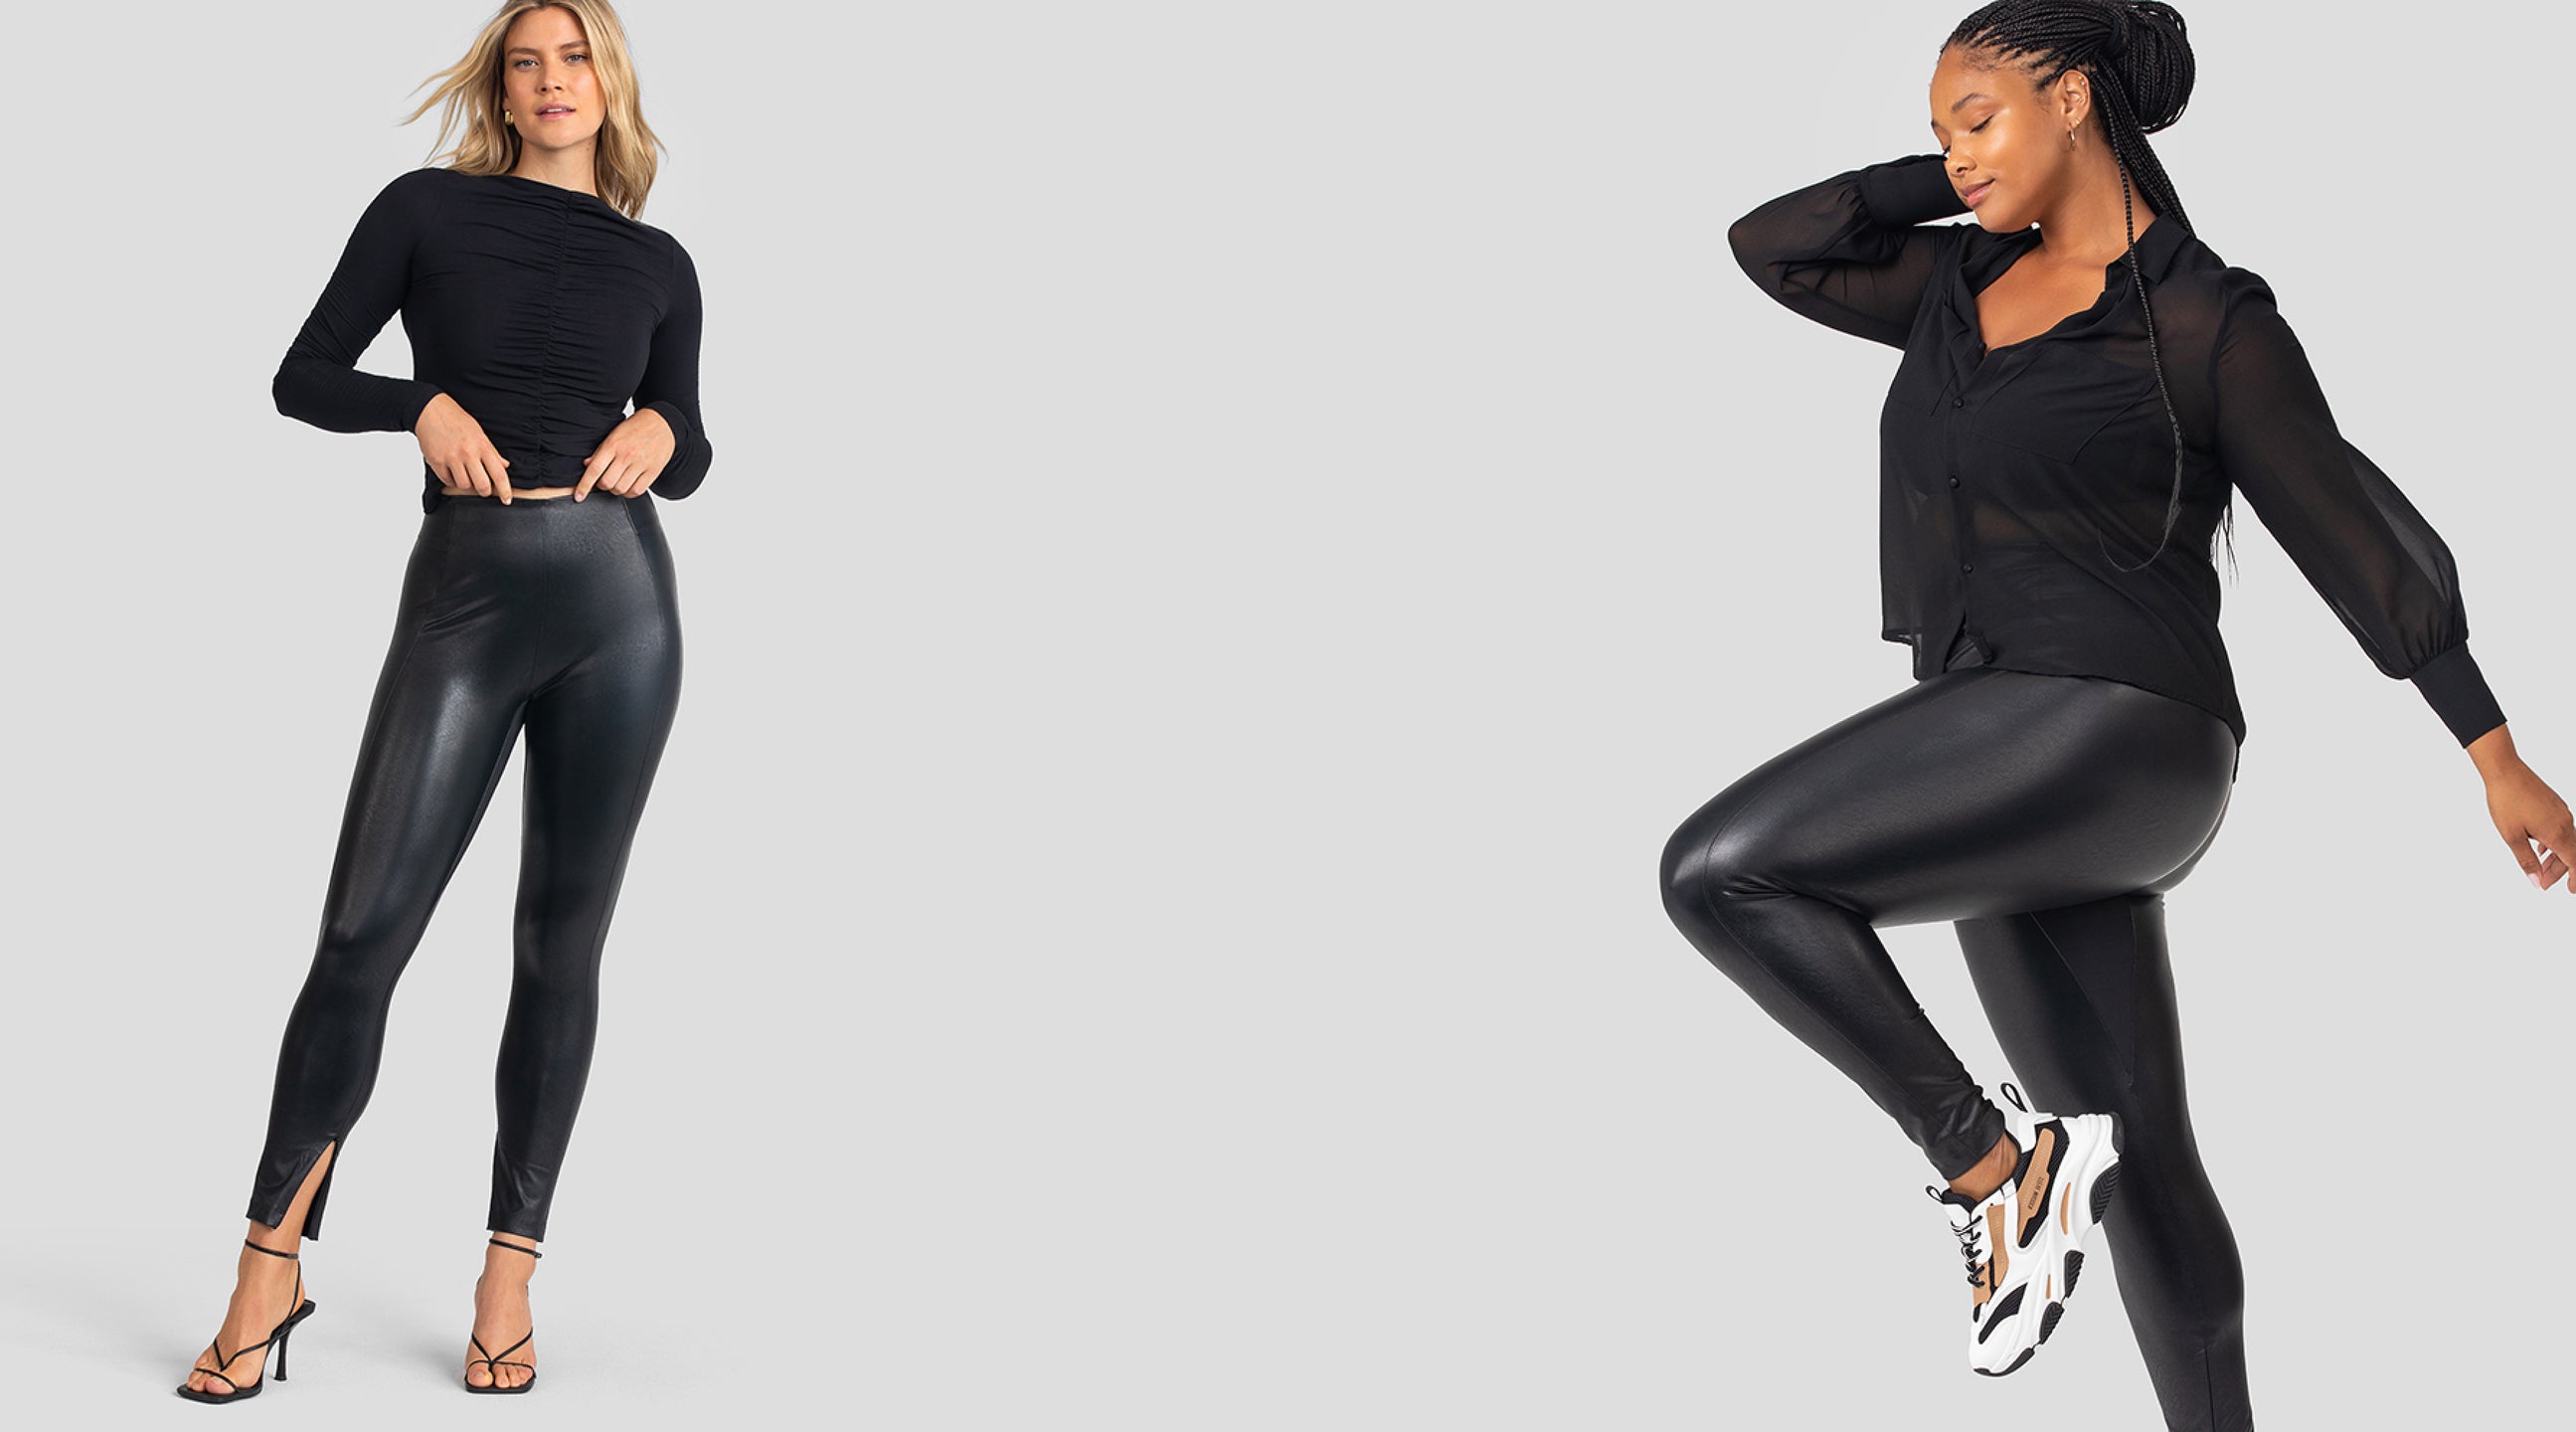 Obsessed with these new vegan leather leggings from @honeylove use